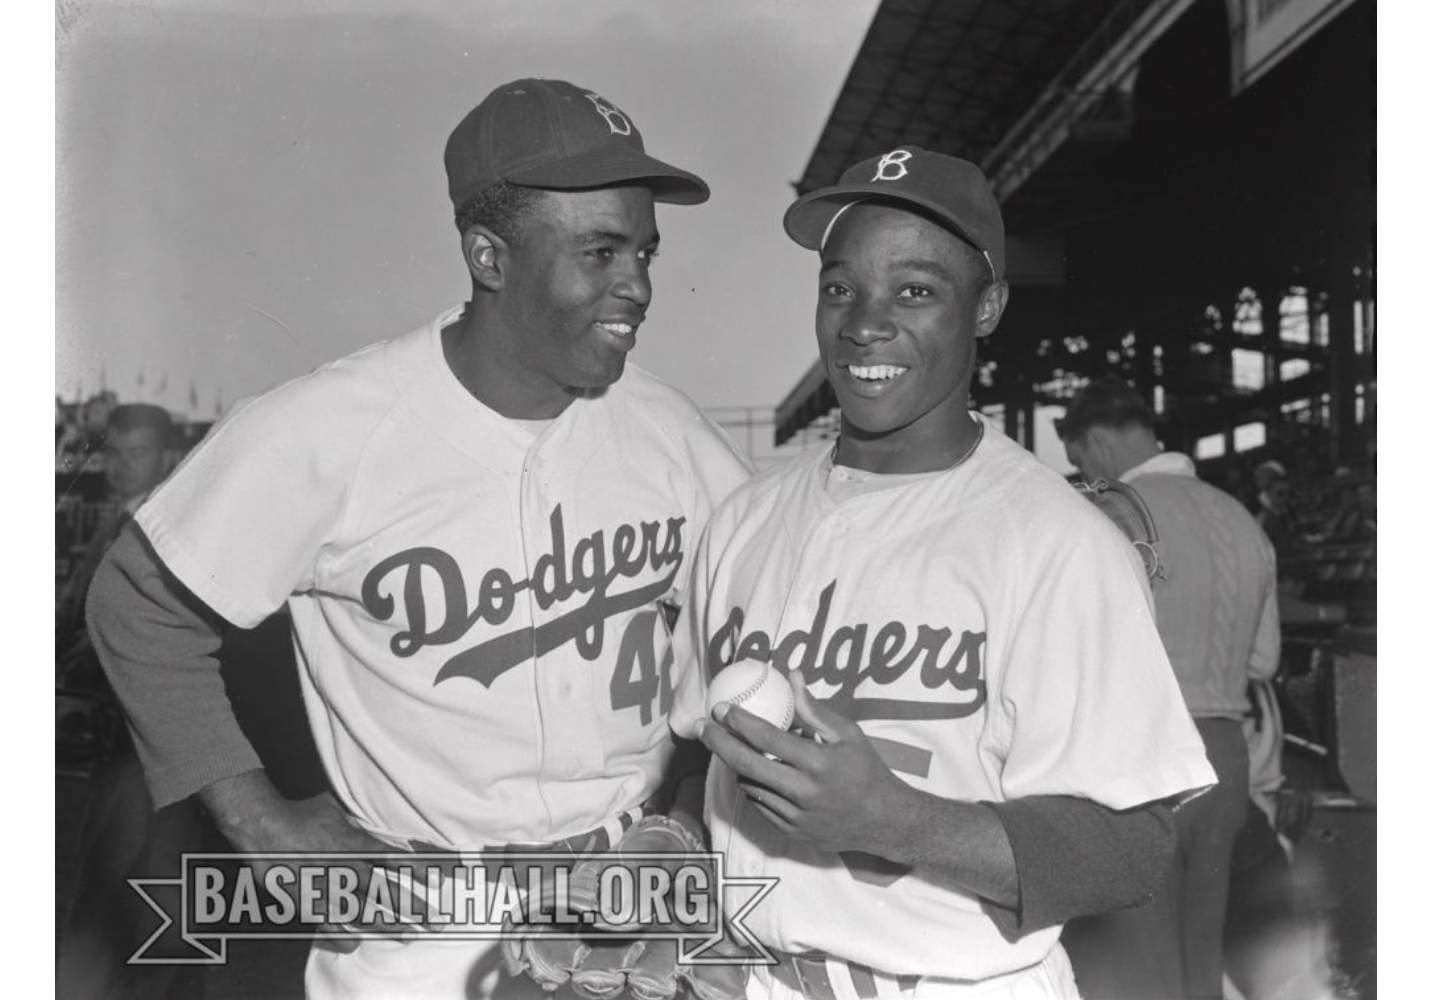 Jackie Robinson (left) and Sandy Amoros (right) posed together on the field at Ebbets Field, taken in 1952.